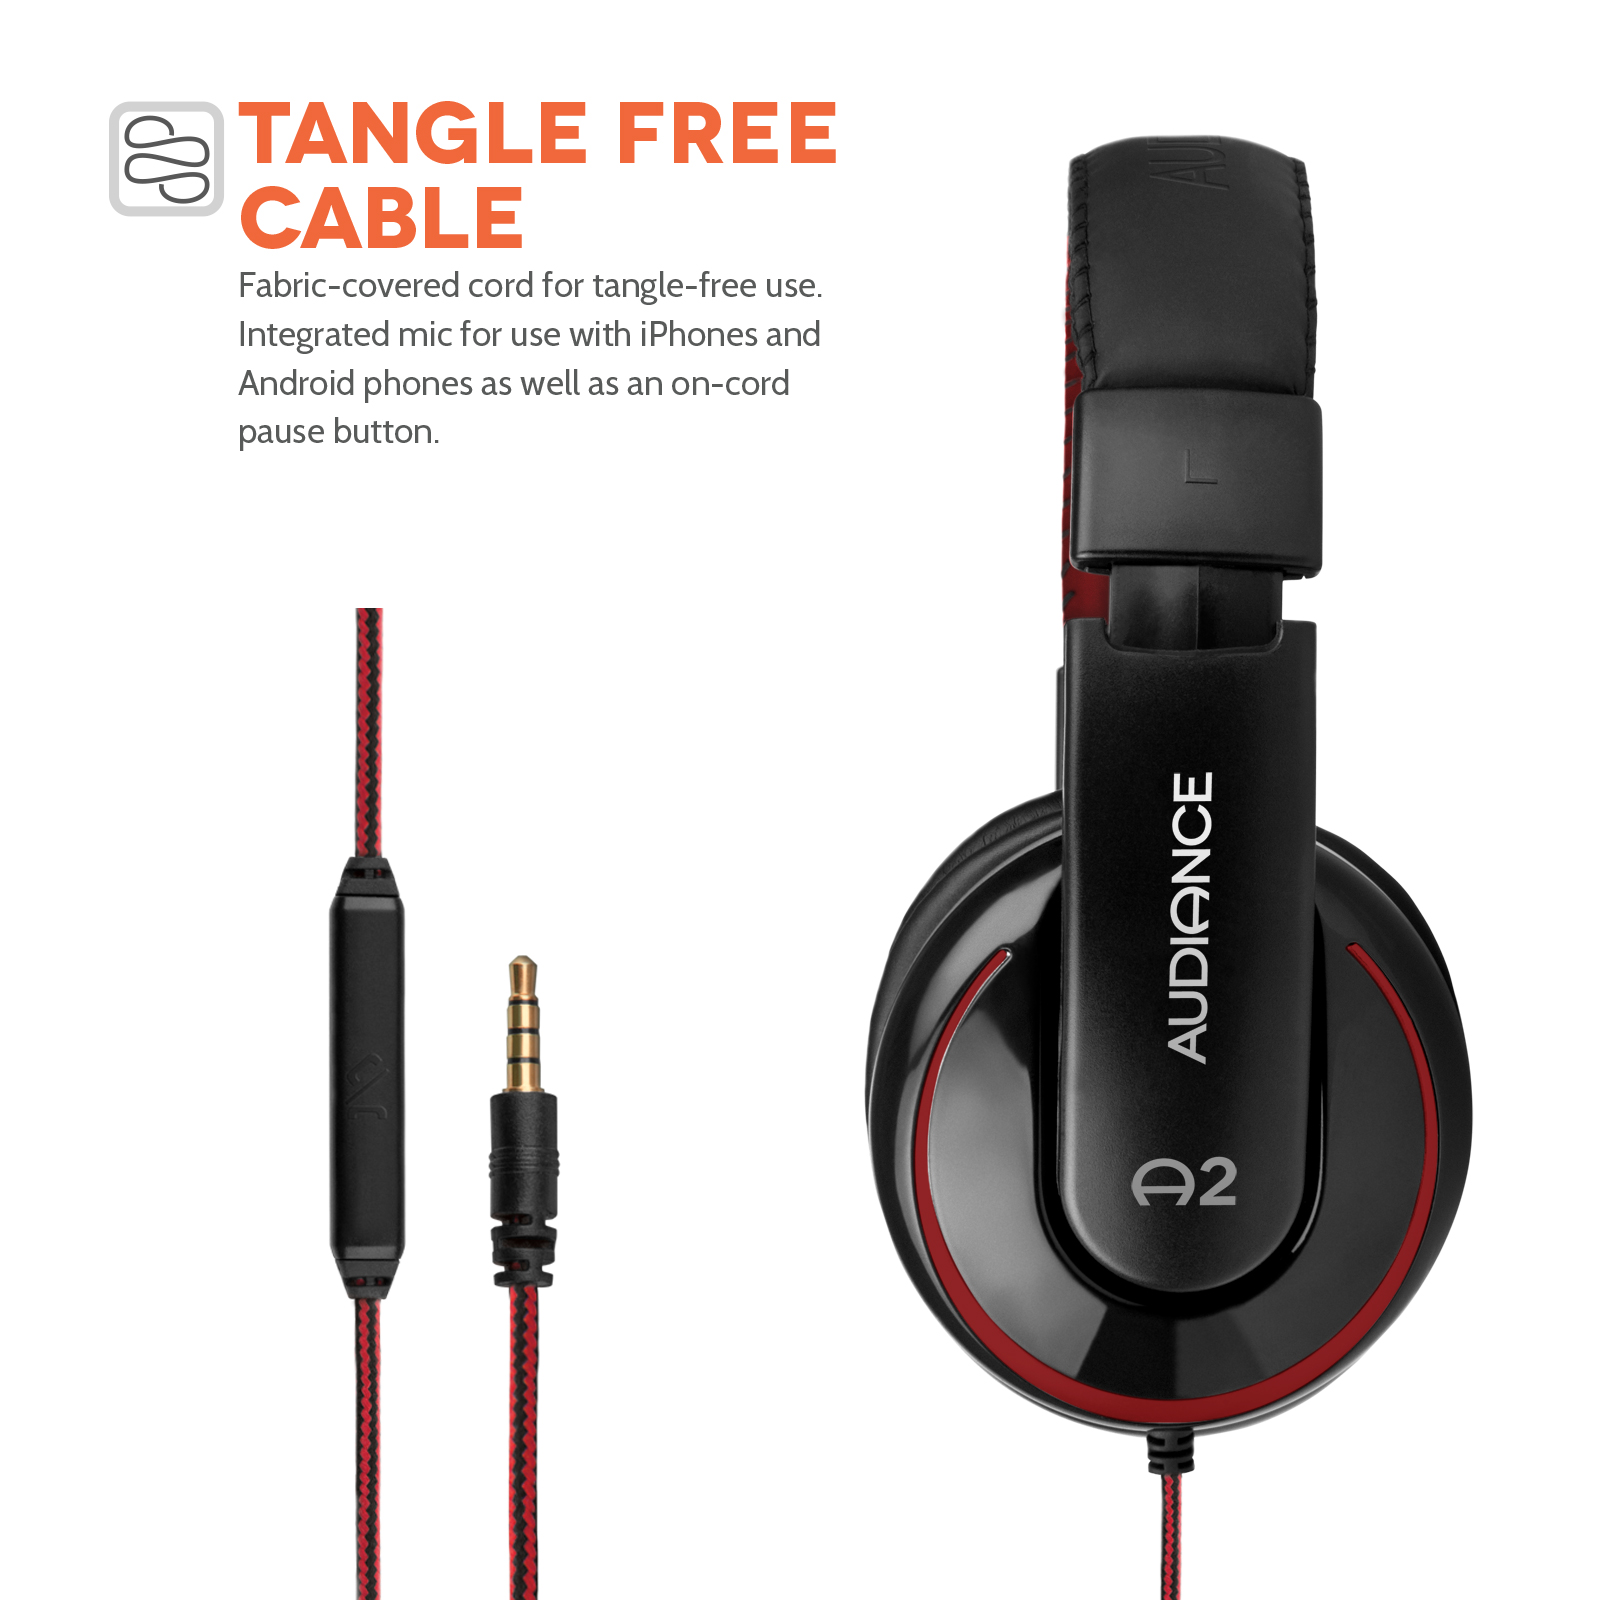 Audiance A2 Headphones - Black/Red